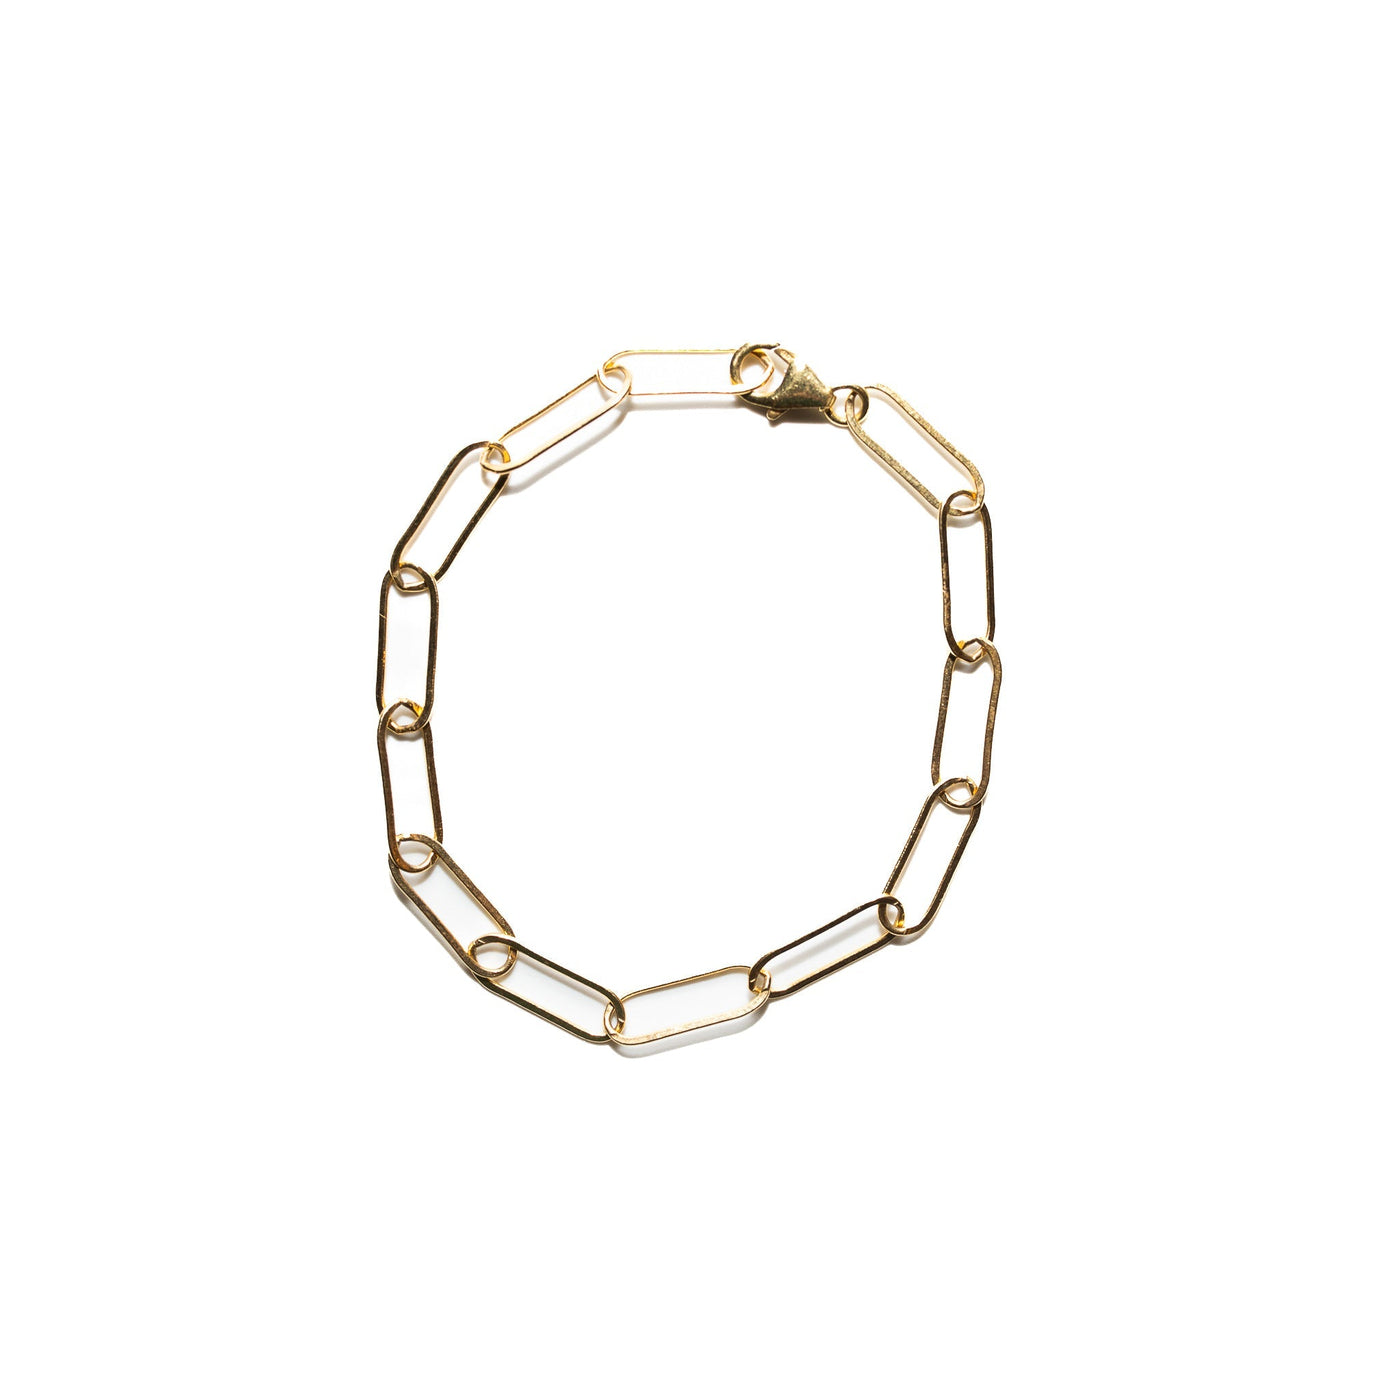 14K Yellow Gold Filled Paperclip Bracelet 02.